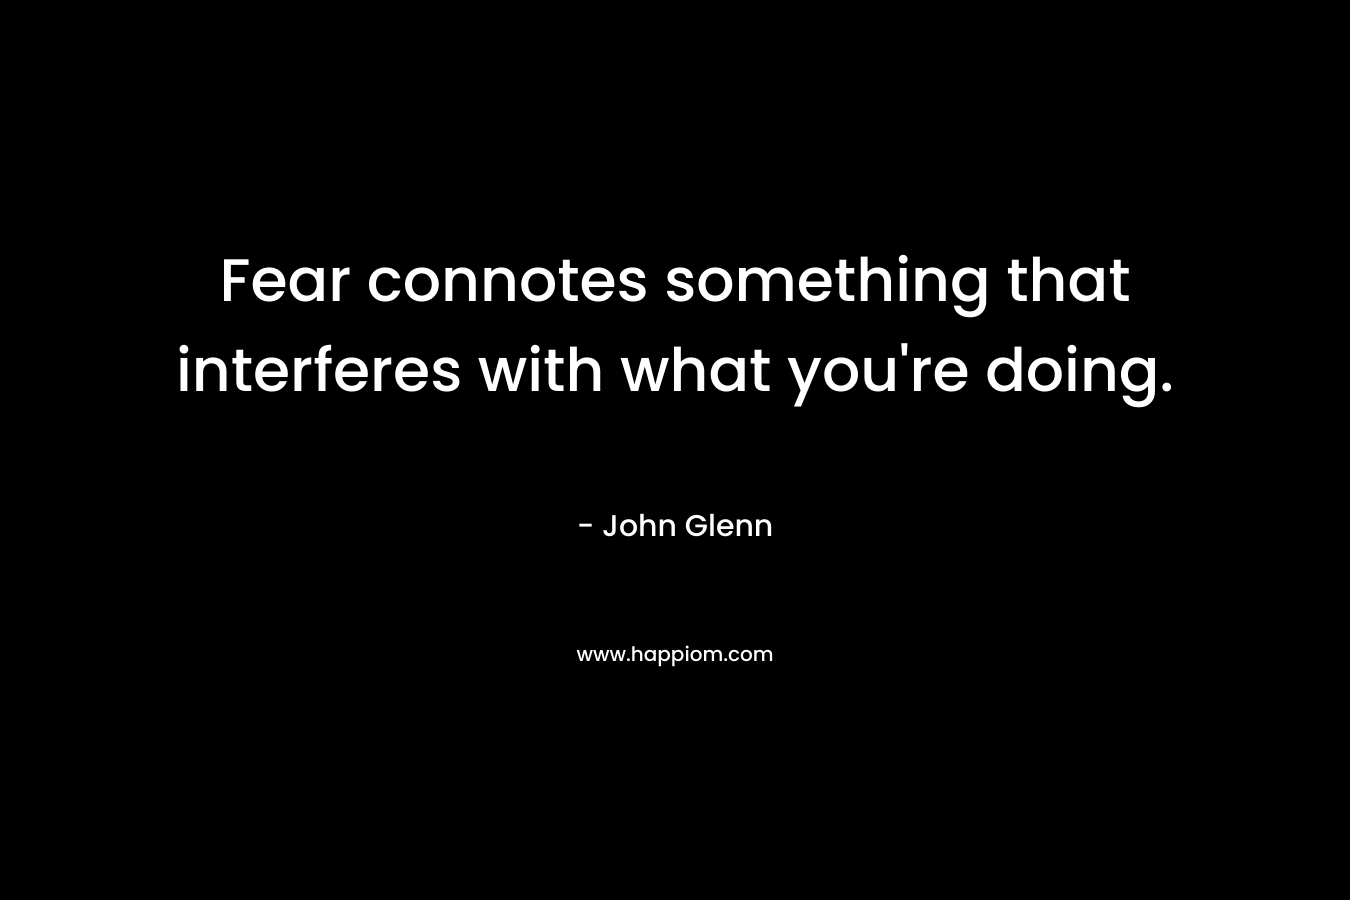 Fear connotes something that interferes with what you're doing.